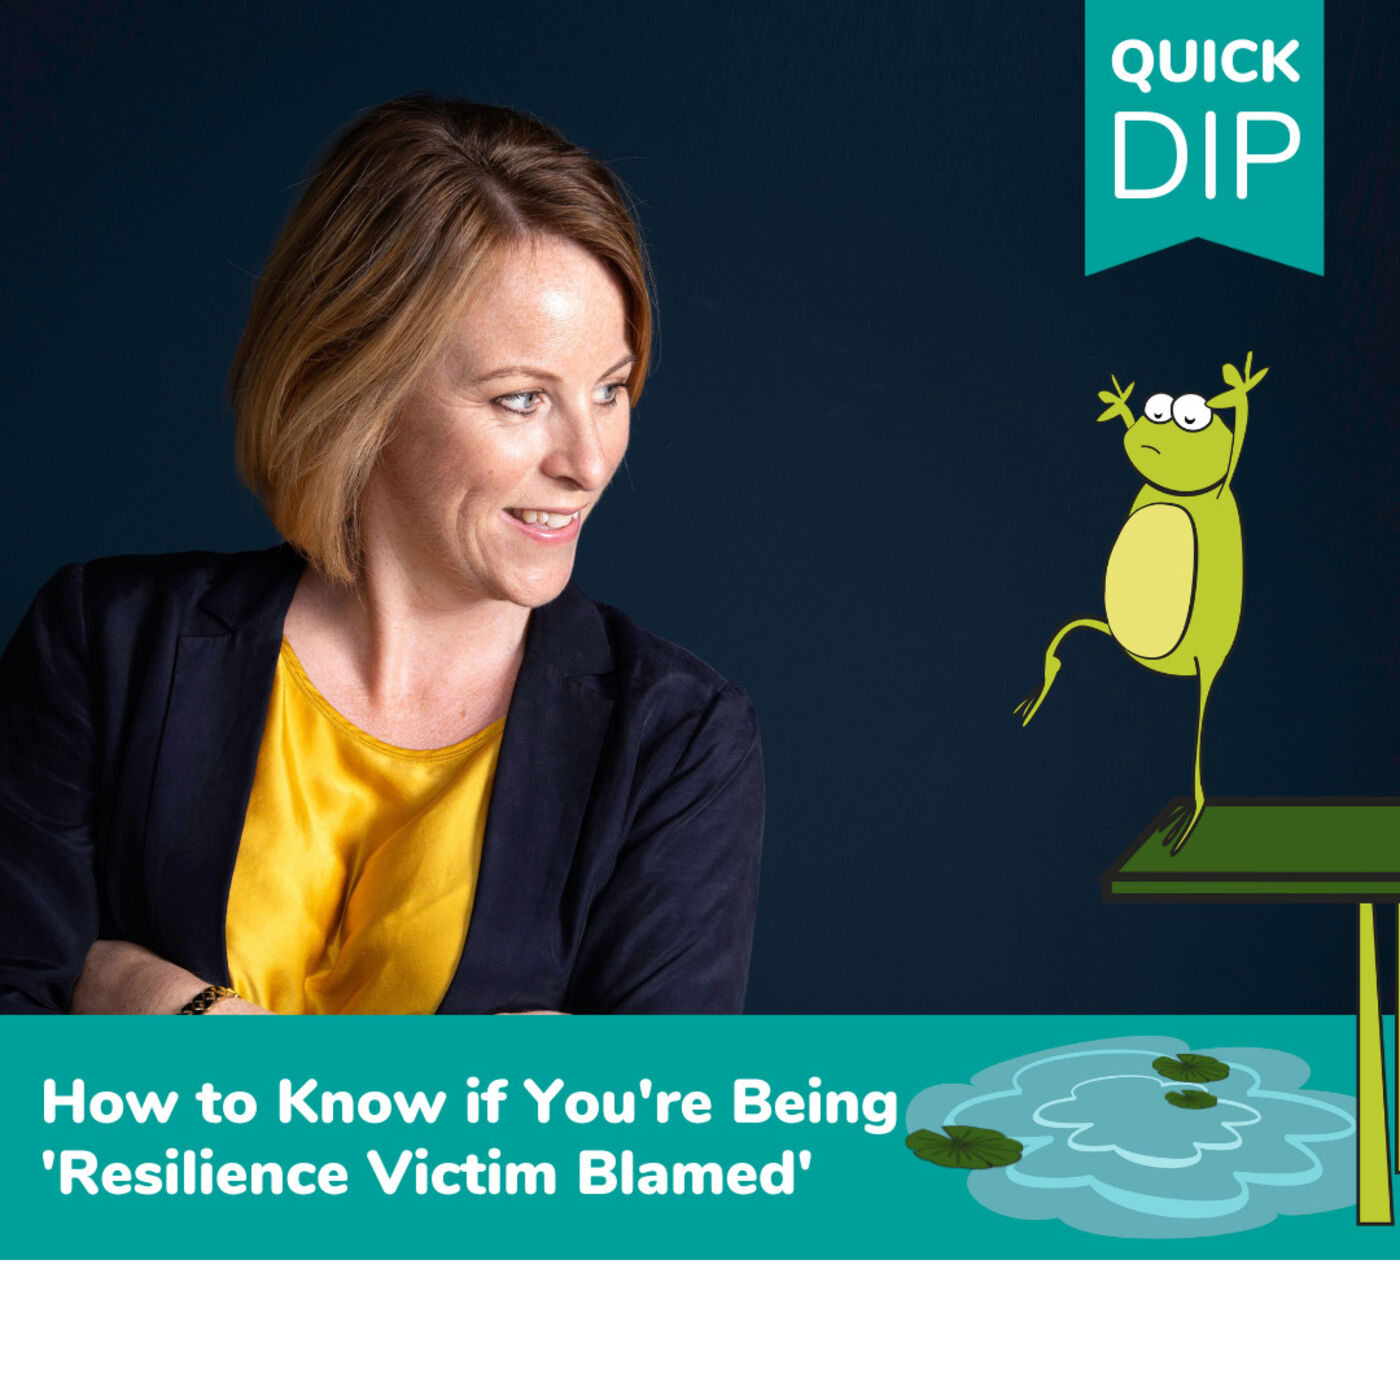 How to Know if You’re Being ‘Resilience Victim Blamed’